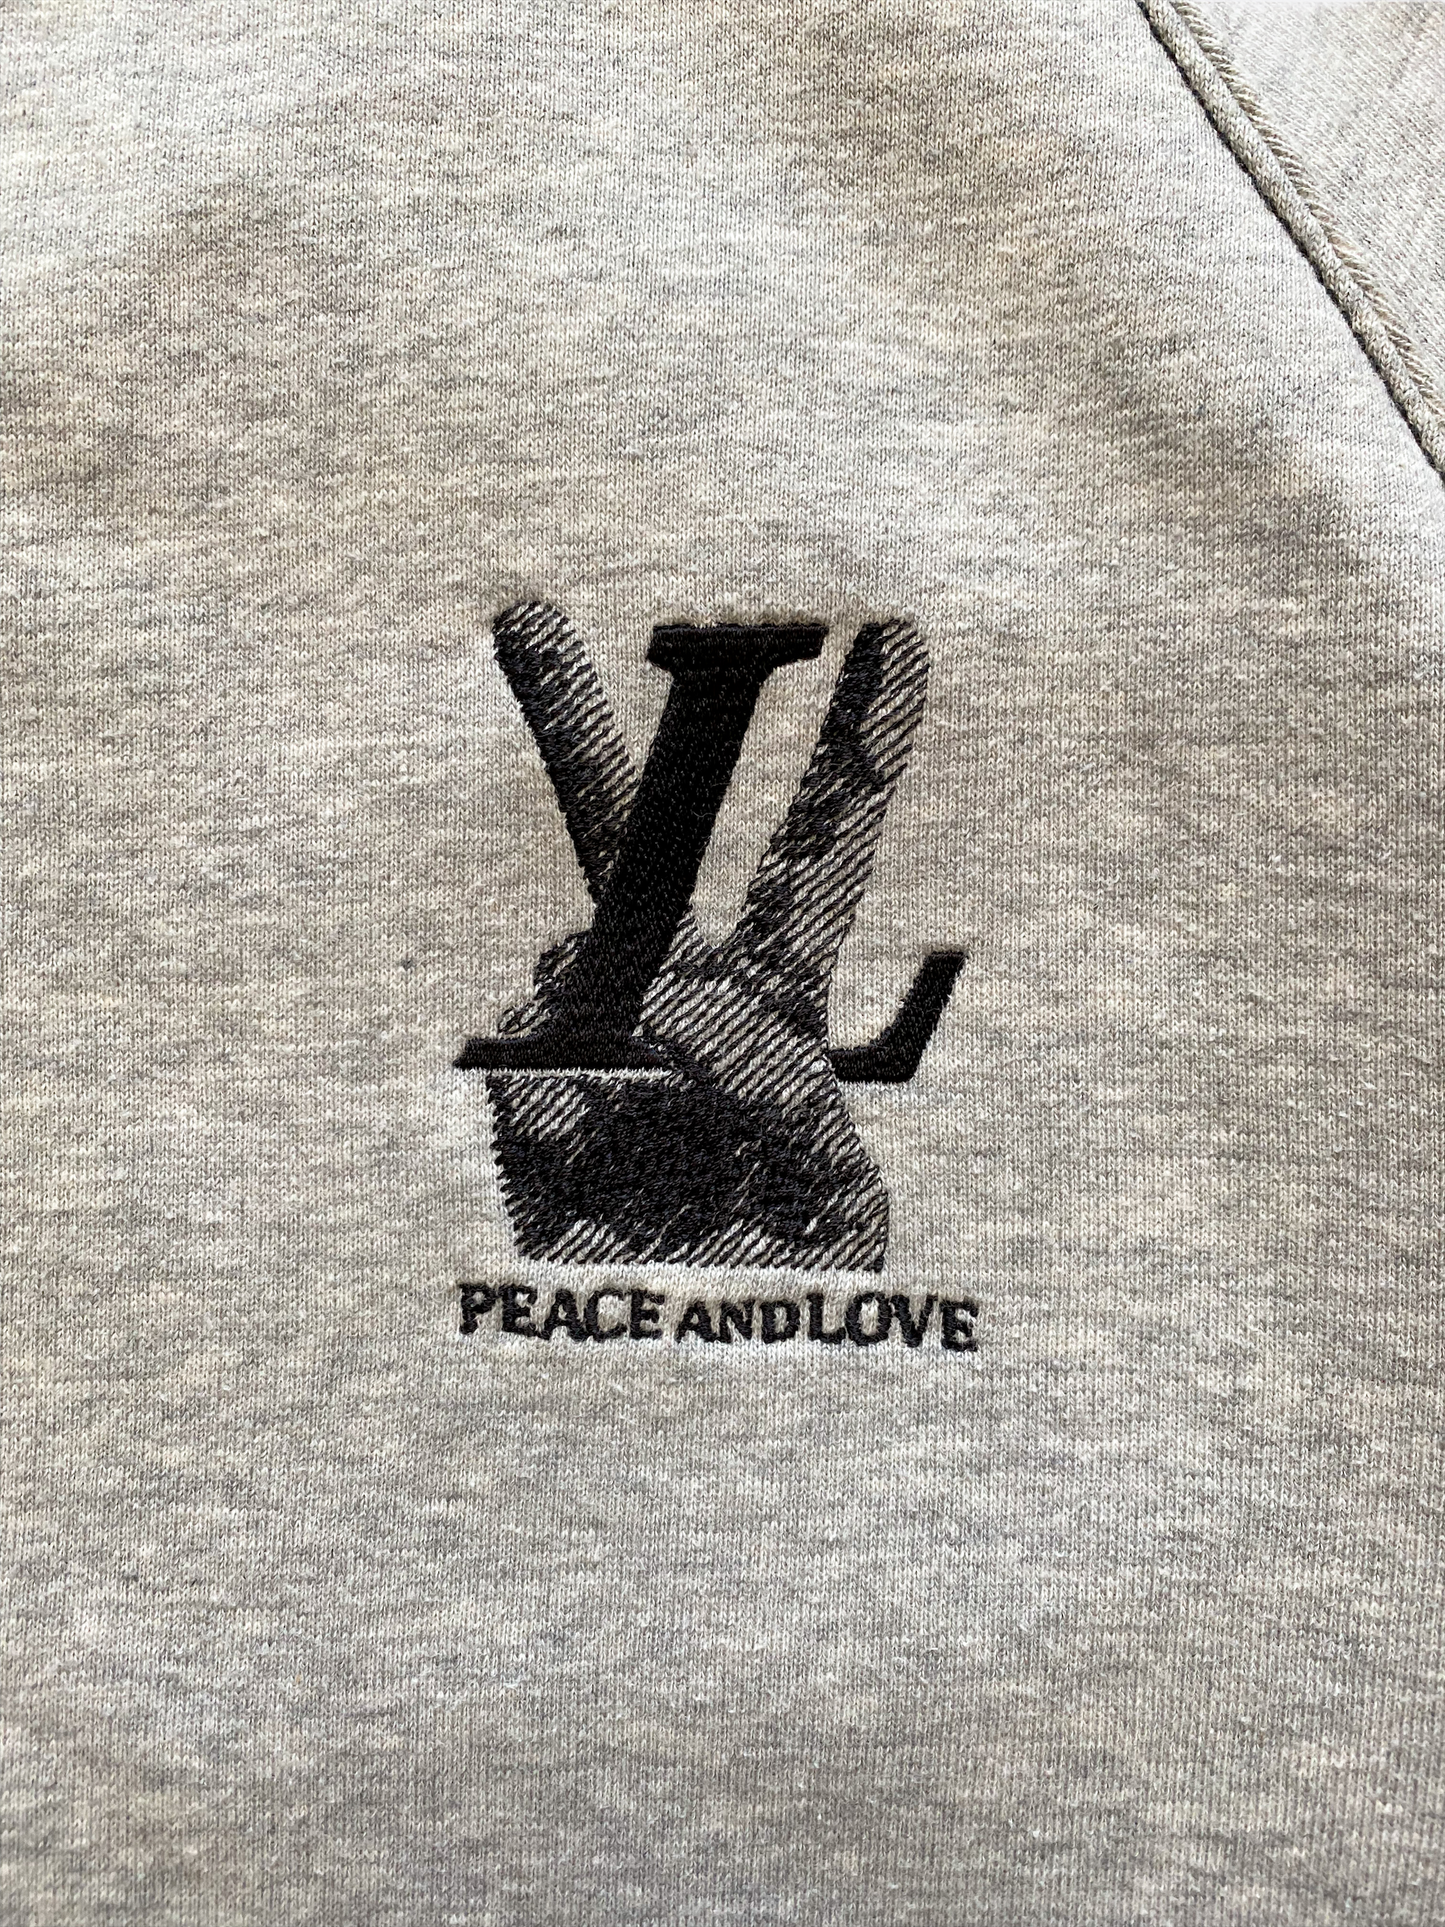 Louis Vuitton Louis Vuitton Peace and Love Knit Sweater FW18